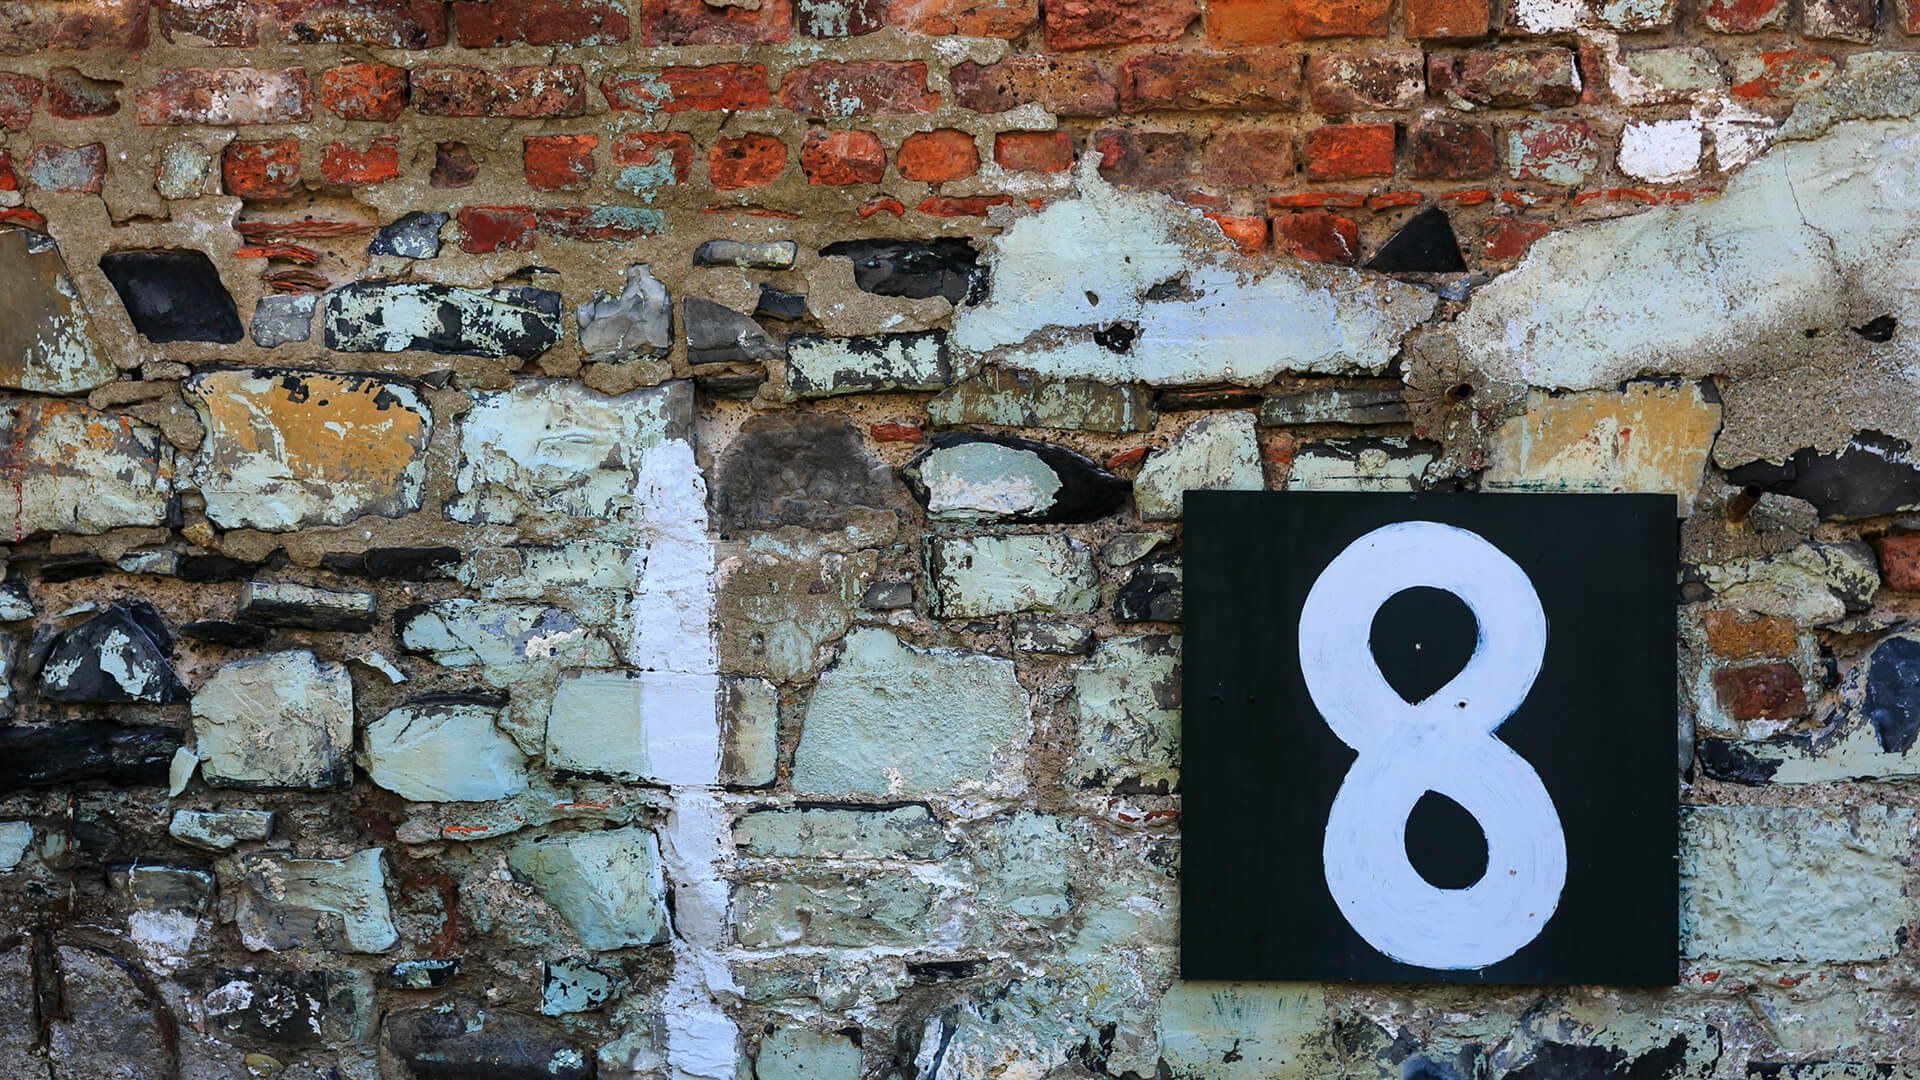 A close-up detail of a colourful, patchwork stone wall. A black sign is mounted on the wall with a number '8' painted on it in white.